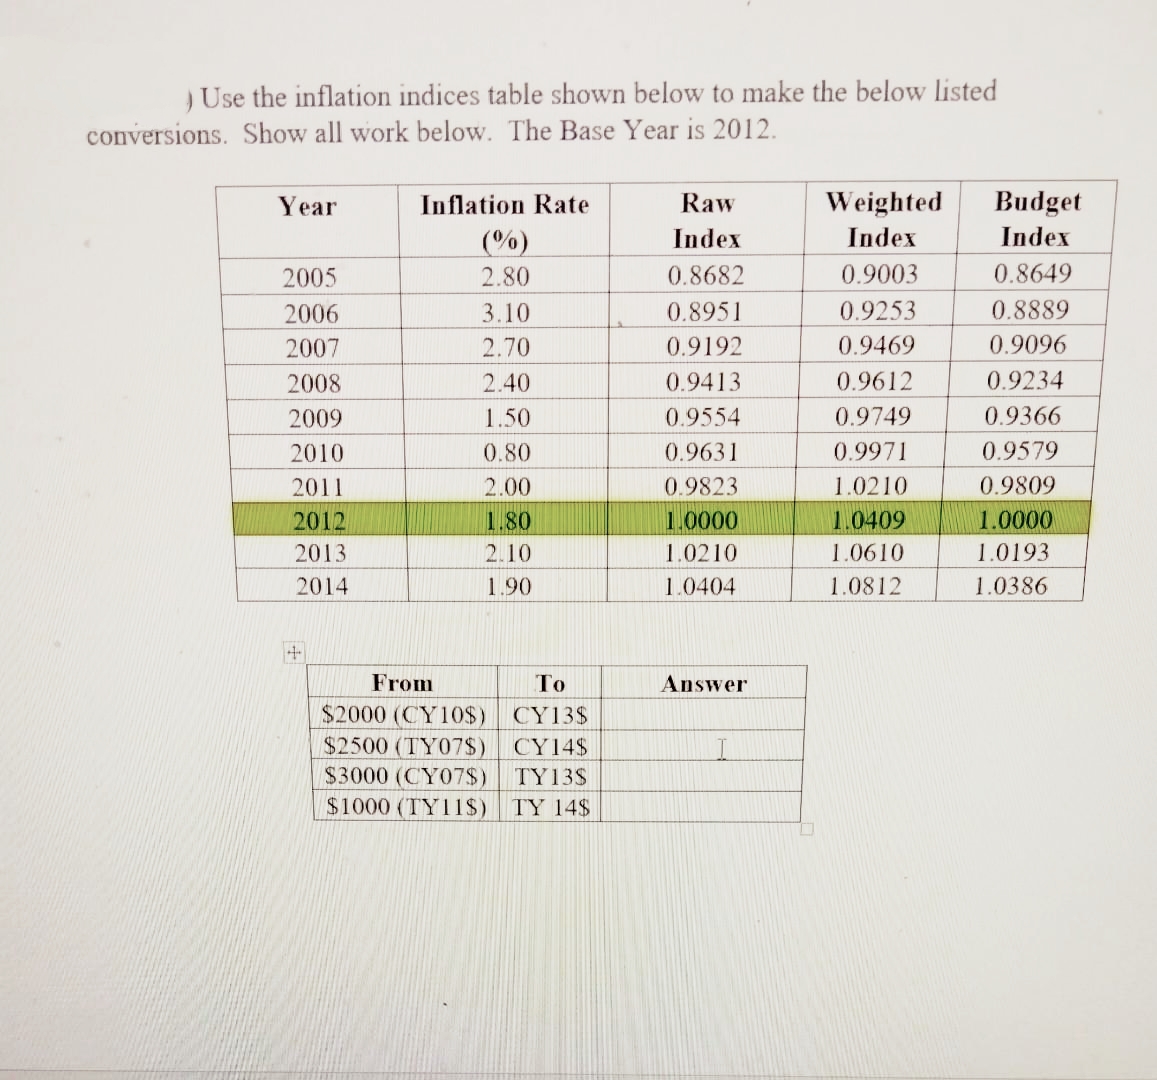 ) Use the inflation indices table shown below to make the below listed
conversions. Show all work below. The Base Year is 2012.
Year
2005
2006
2007
2008
2009
2010
2011
2012
2013
2014
+
Inflation Rate
(%)
2.80
3.10
2.70
2.40
1.50
0.80
2.00
1.80
2.10
1.90
From
$2000 (CY10$)
$2500 (TY07$)
$3000 (CY07$)
$1000 (TY11$) TY 14$
To
CY13$
CY14$
TY13S
Raw
Index
0.8682
0.8951
0.9192
0.9413
0.9554
0.9631
0.9823
1.0000
1.0210
1.0404
Answer
Weighted
Index
0.9003
0.9253
0.9469
0.9612
0.9749
0.9971
1.0210
1.0409
1.0610
1.0812
Budget
Index
0.8649
0.8889
0.9096
0.9234
0.9366
0.9579
0.9809
1.0000
1.0193
1.0386